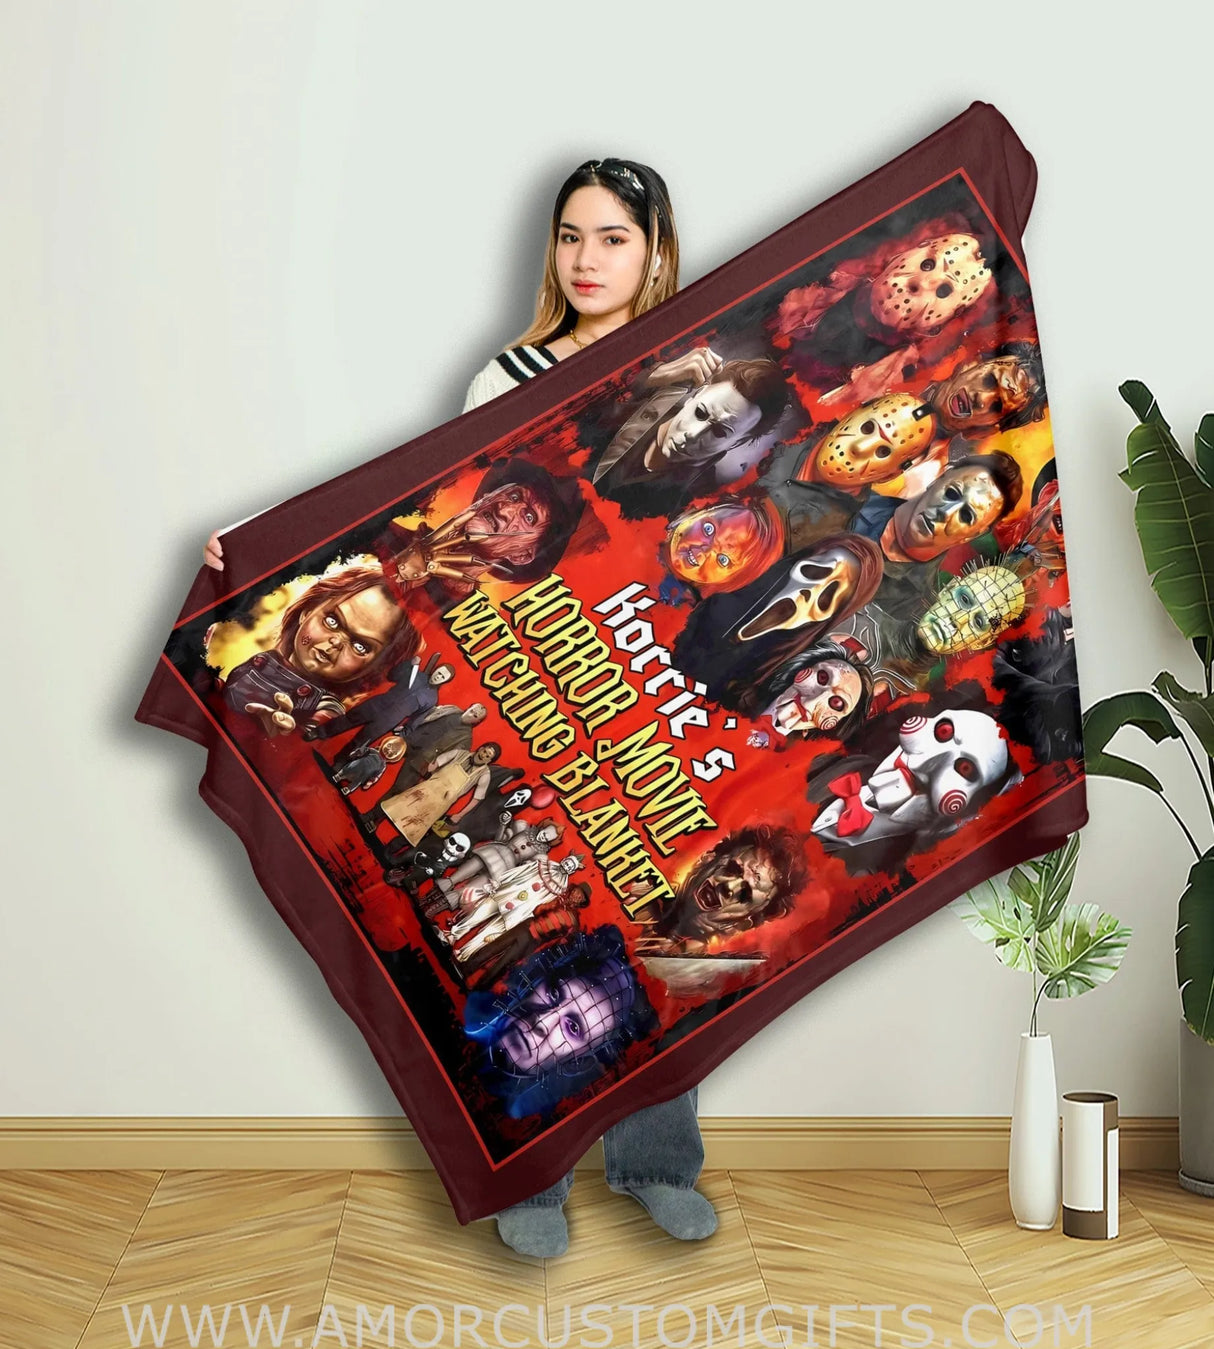 Blankets Personalized Name My Horror Movie 5 Halloween Blanket